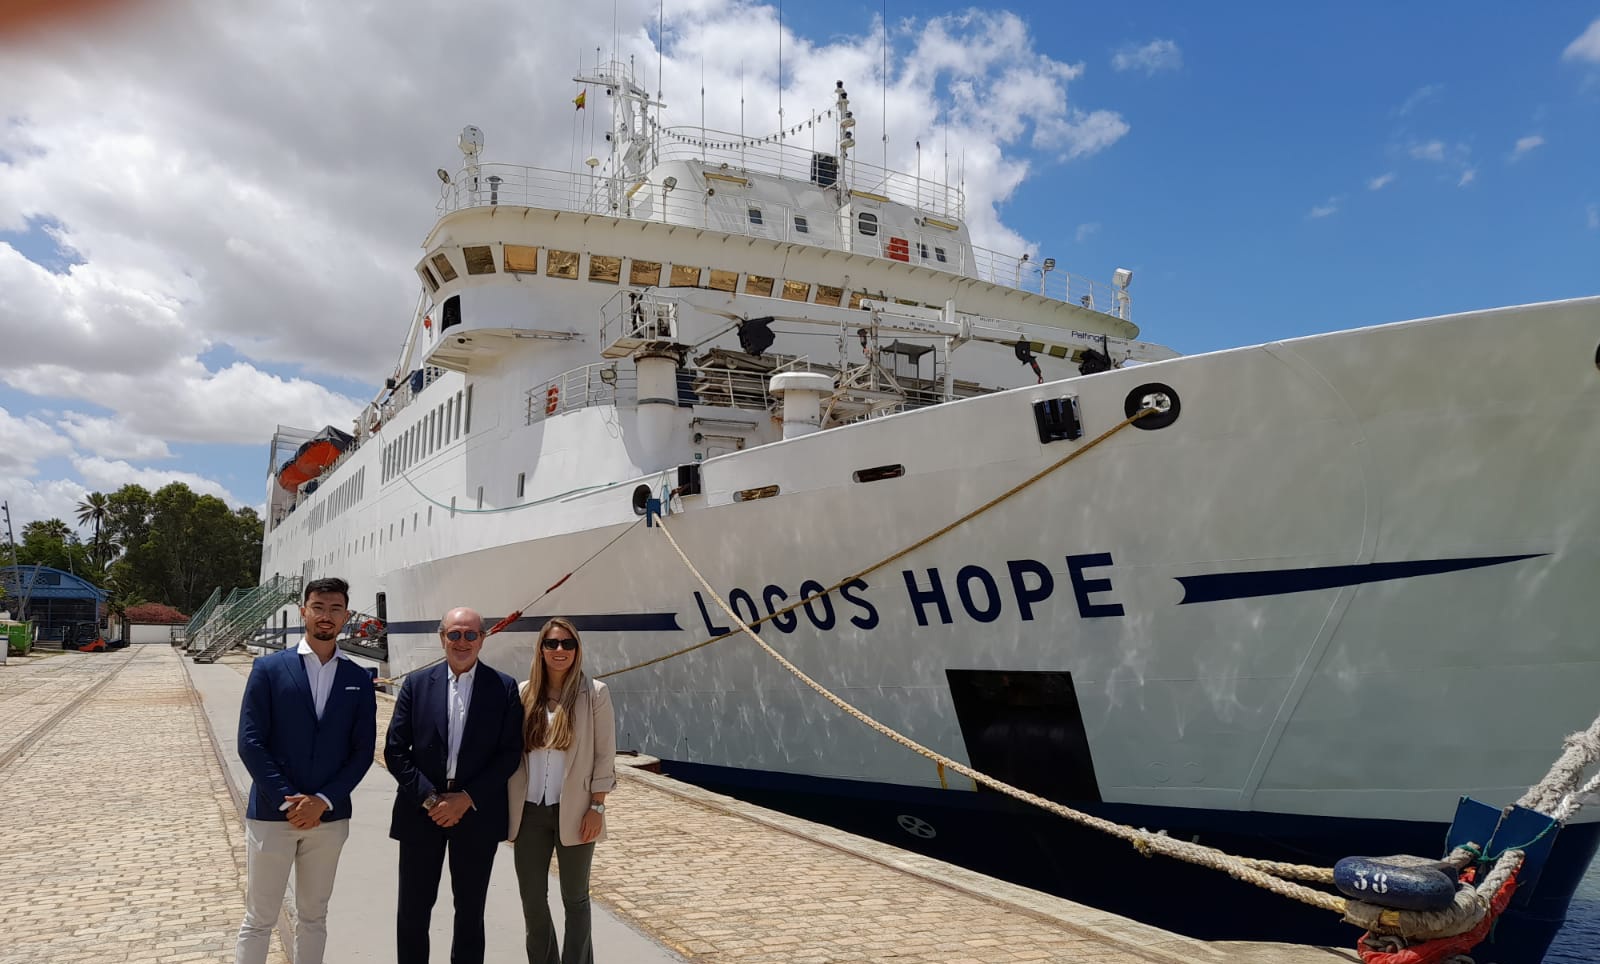 Welcome to `Logos Hope´, the world’s largest floating bookstore